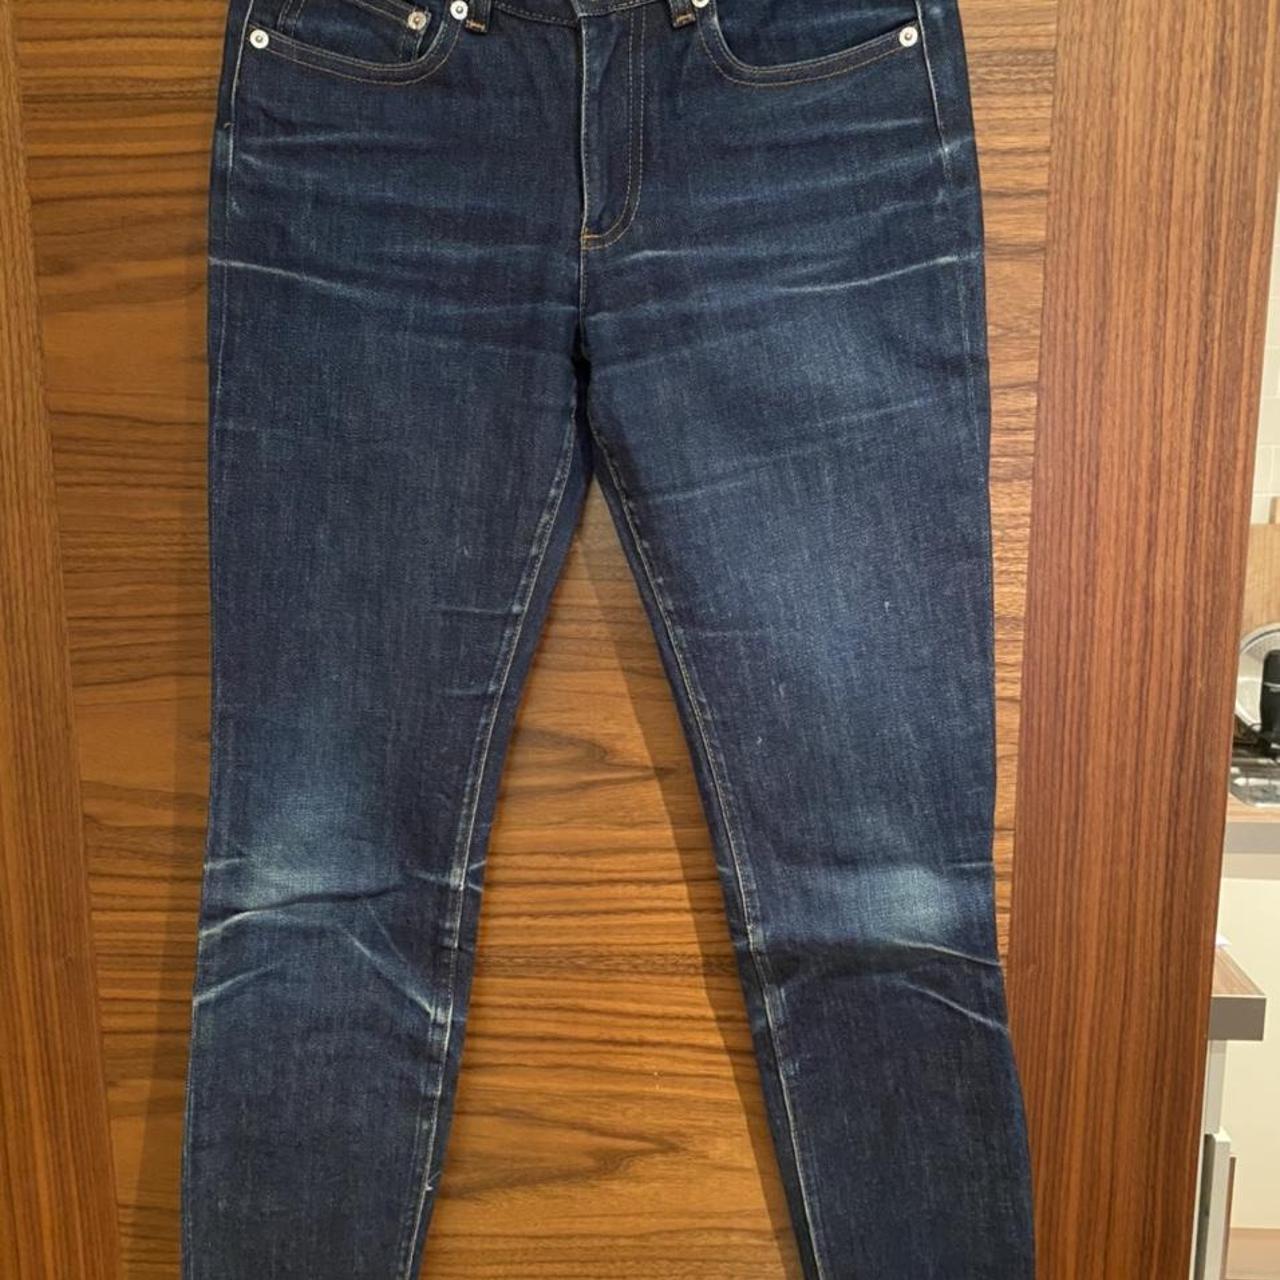 APC jean moulant Good condition, worn out obviously - Depop